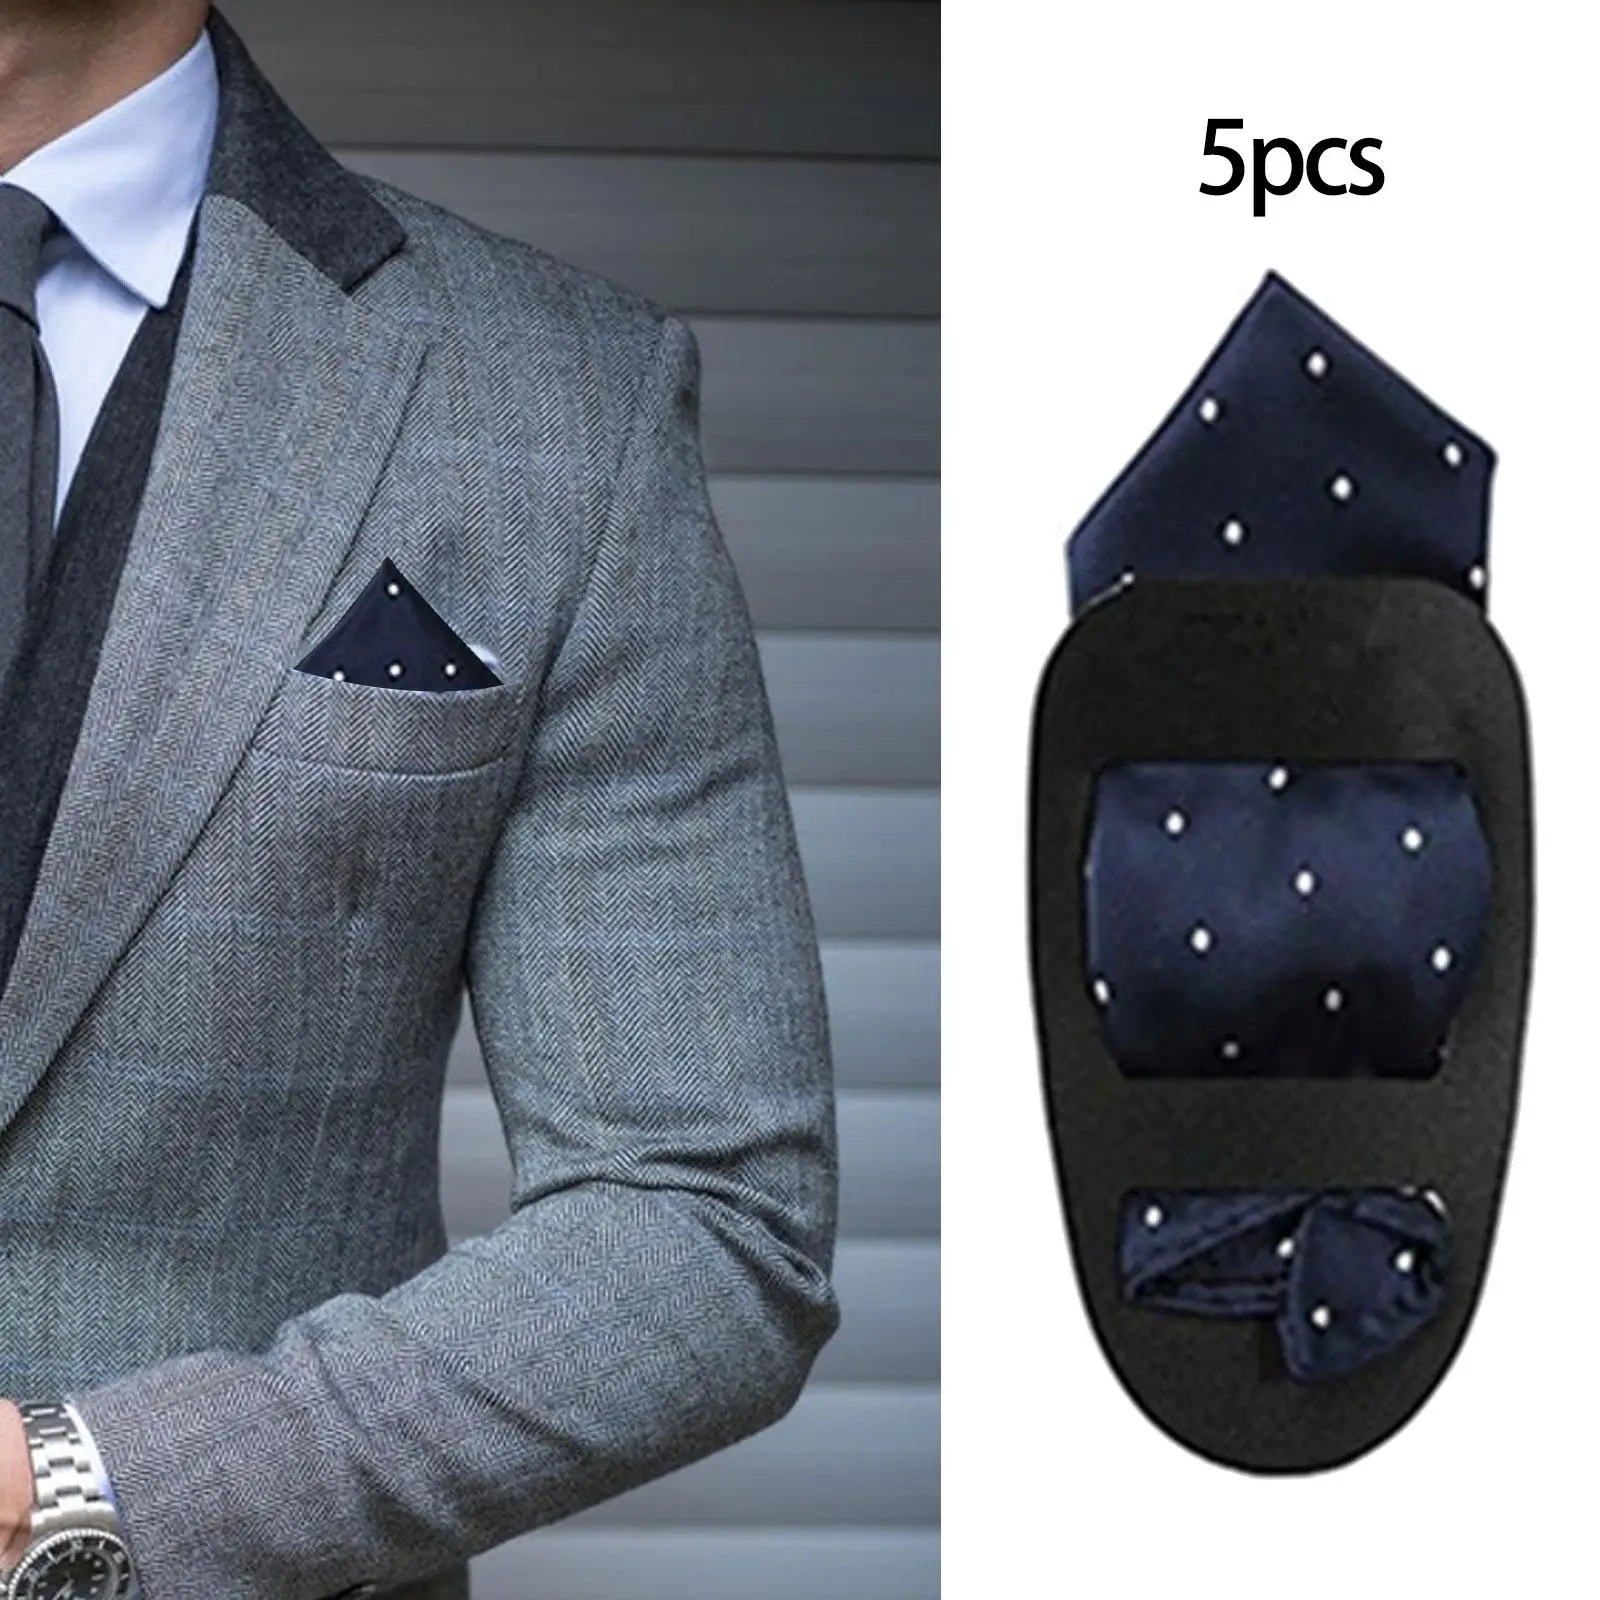 5 Pieces Pocket Square Holder Support Organizer for MenS suits Accessories